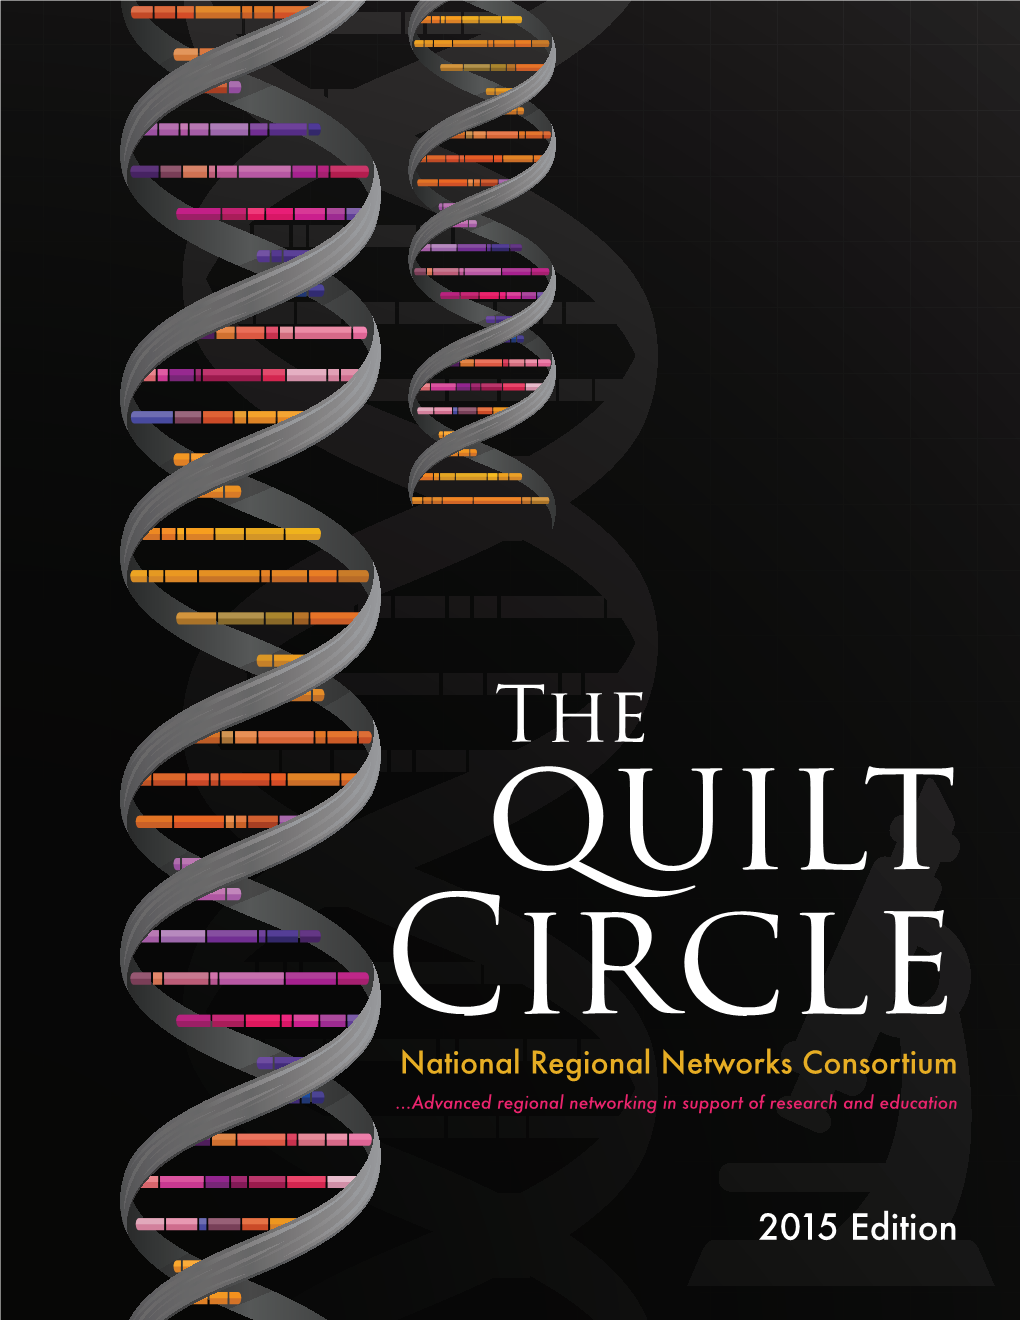 The Quilt Circle 2015